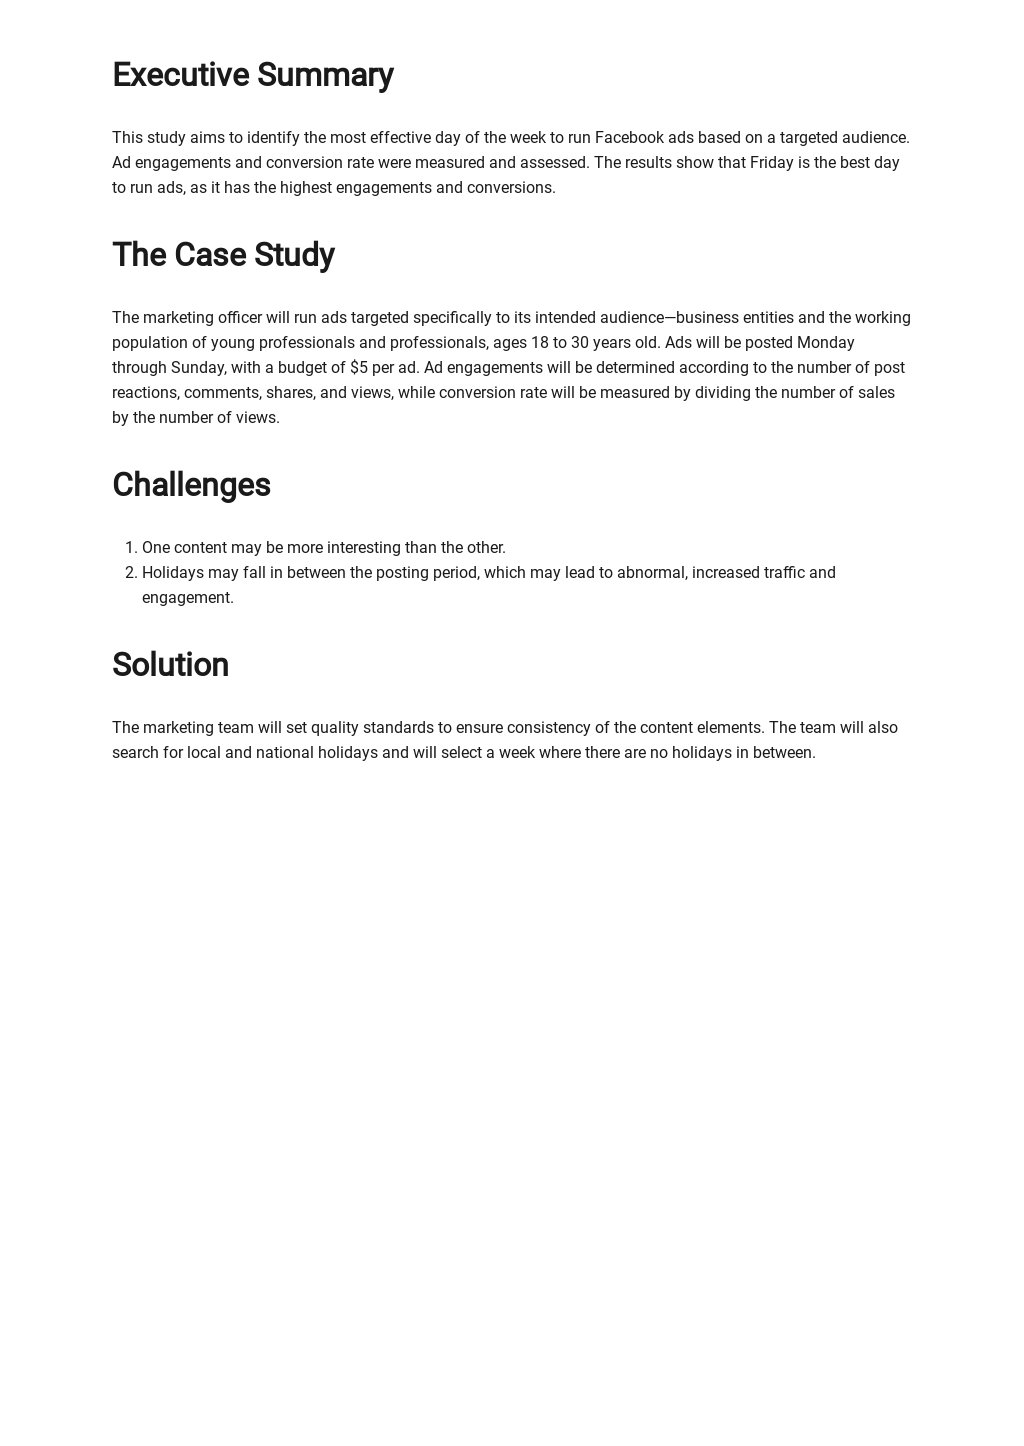 free case study template word download